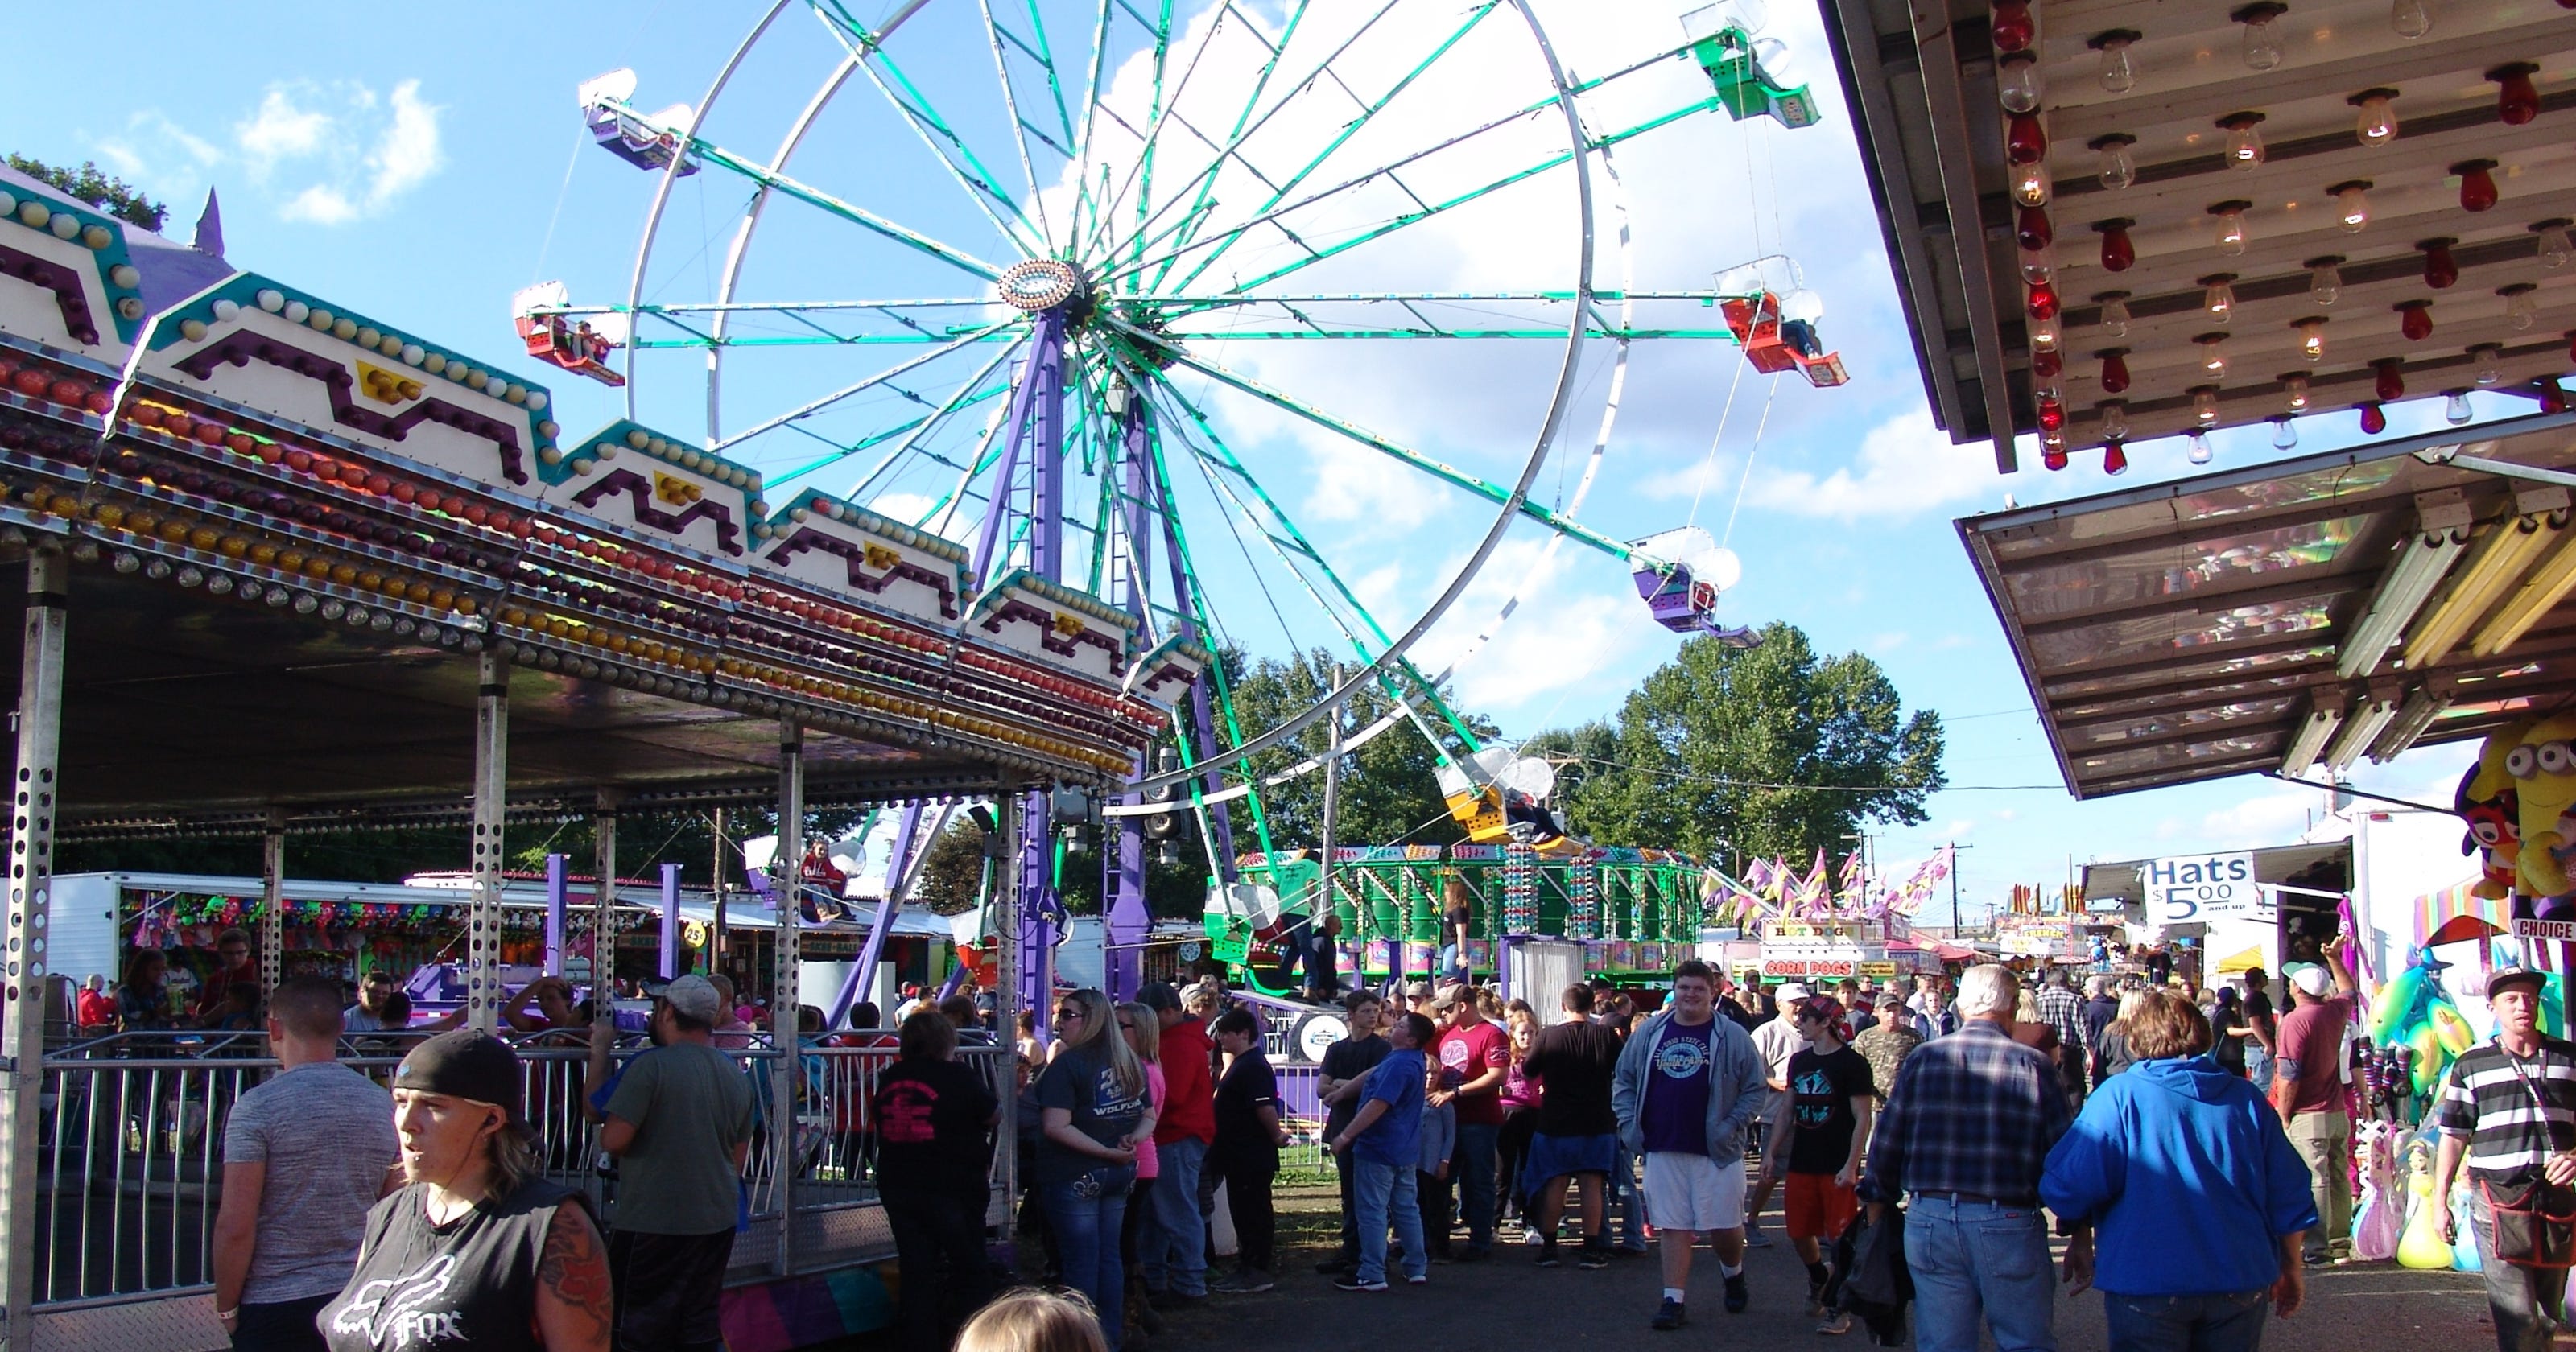 Highlights of this year's Coshocton County fair